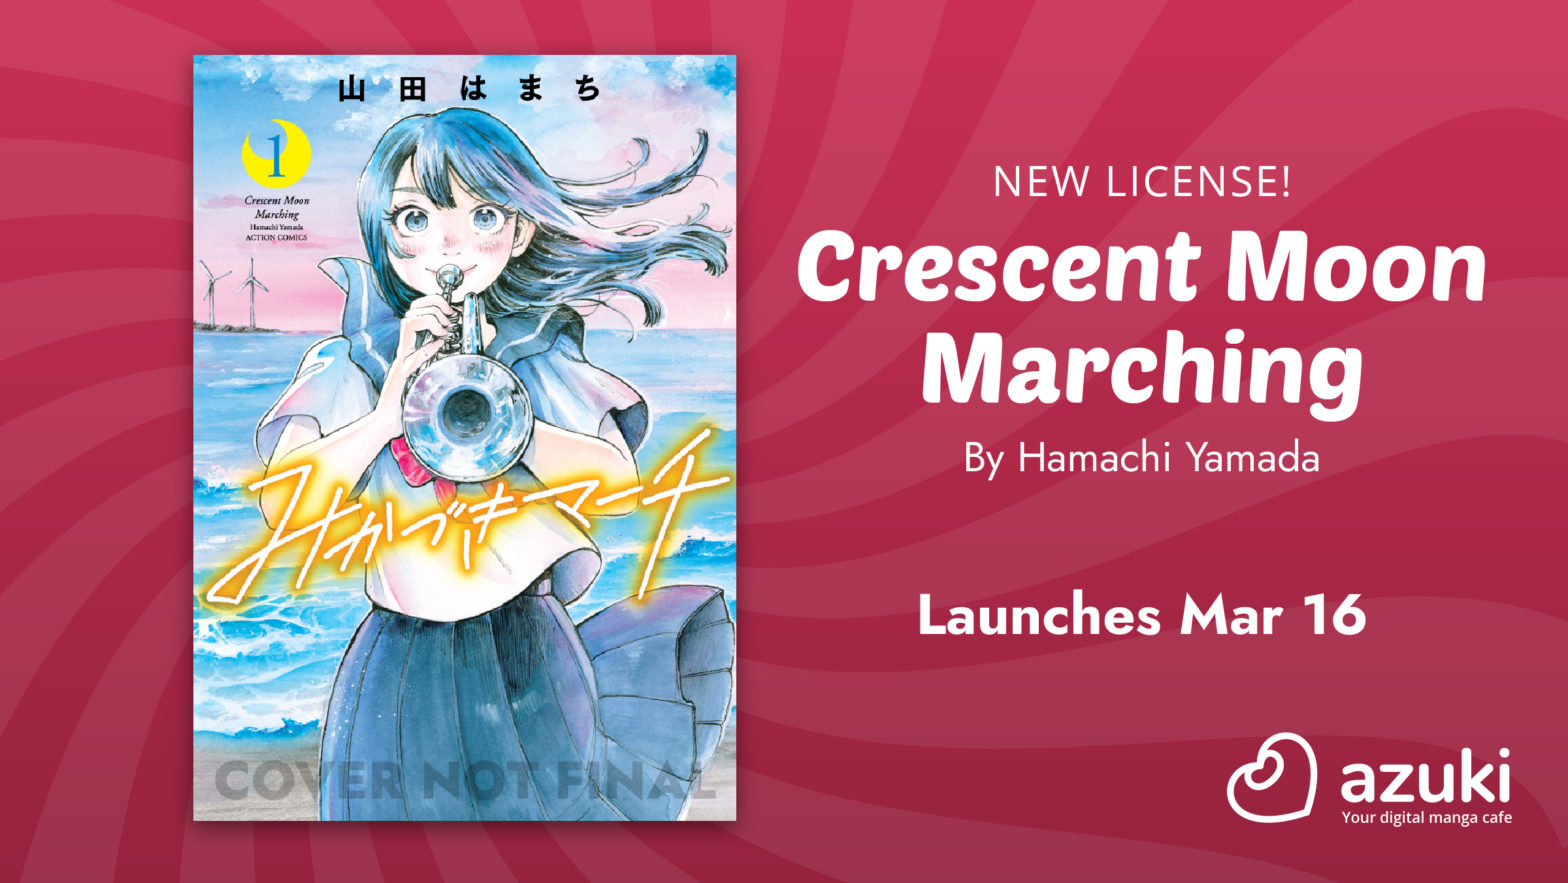 New License! Crescent Moon Marching by Hamachi Yamada. Launches March 9. Azuki: your digital manga cafe.